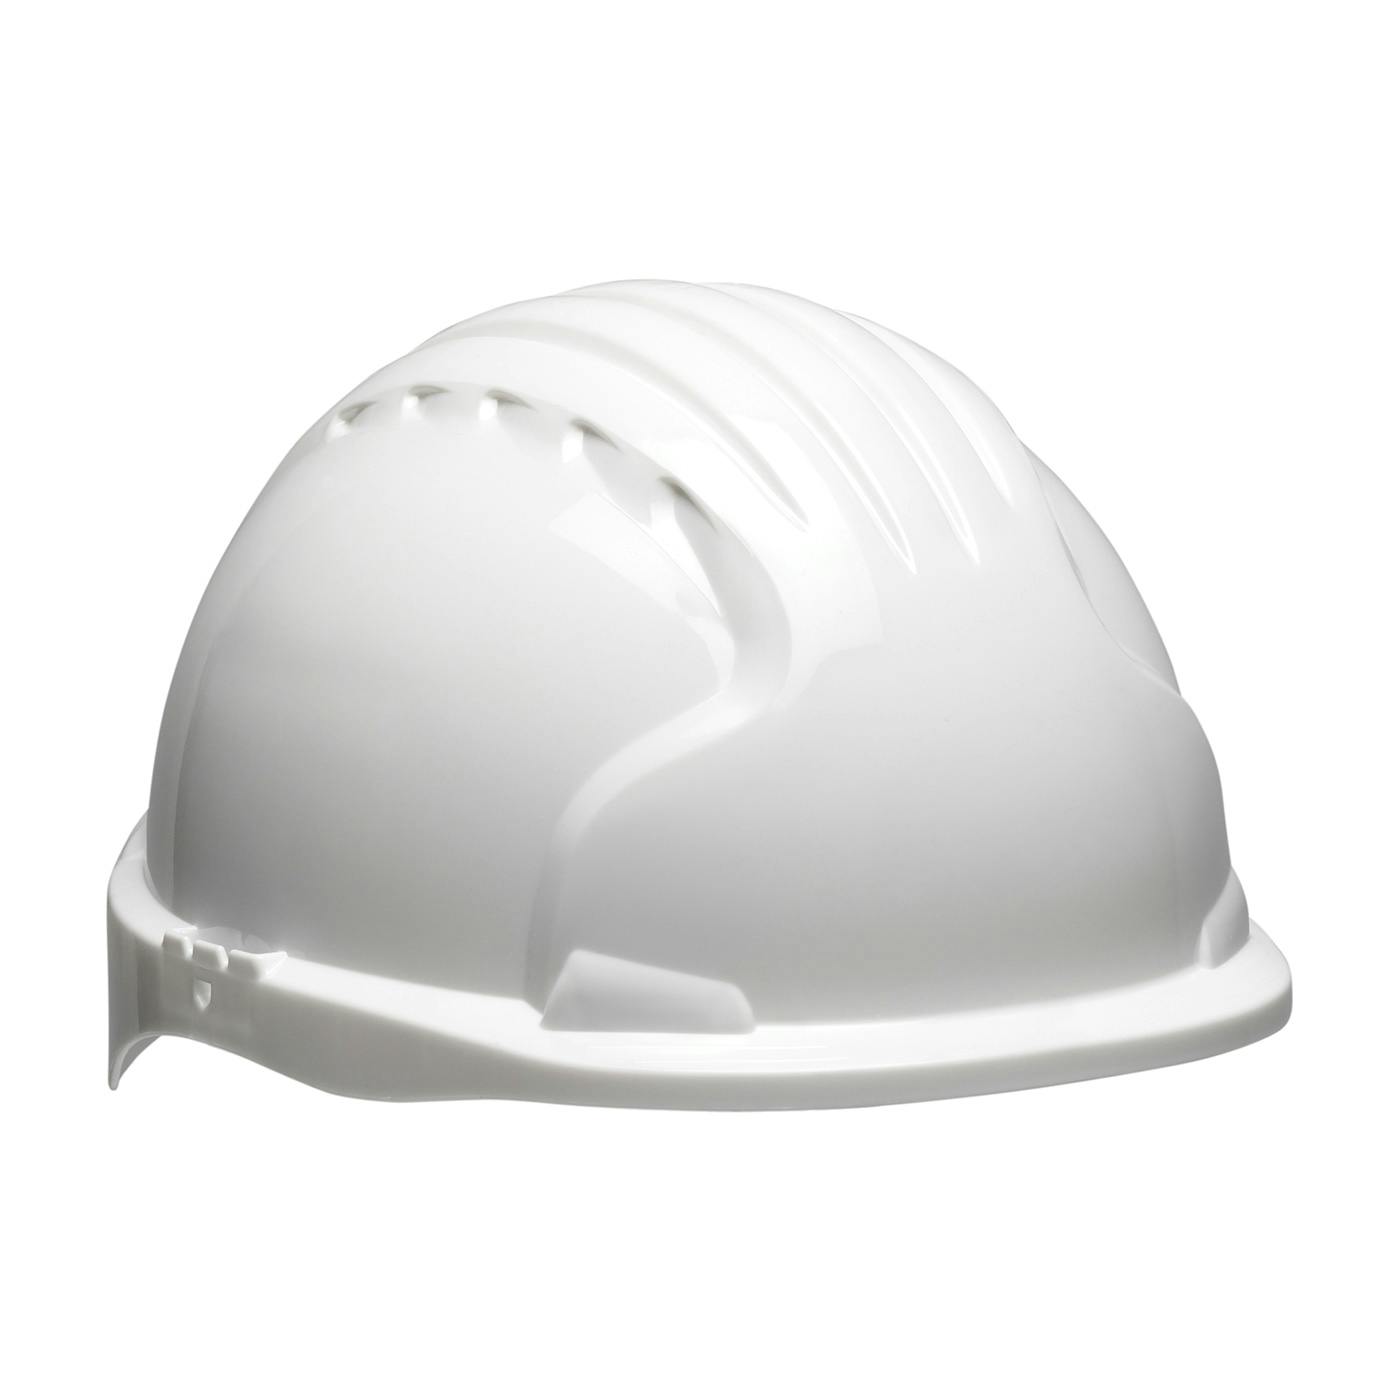 Evolution® Deluxe 6151 Evolution® Deluxe 6151 Short Brim Hard Hat with HDPE Shell, 6-Point Polyester Suspension and Wheel Ratchet Adjustment (280-EV6151S)